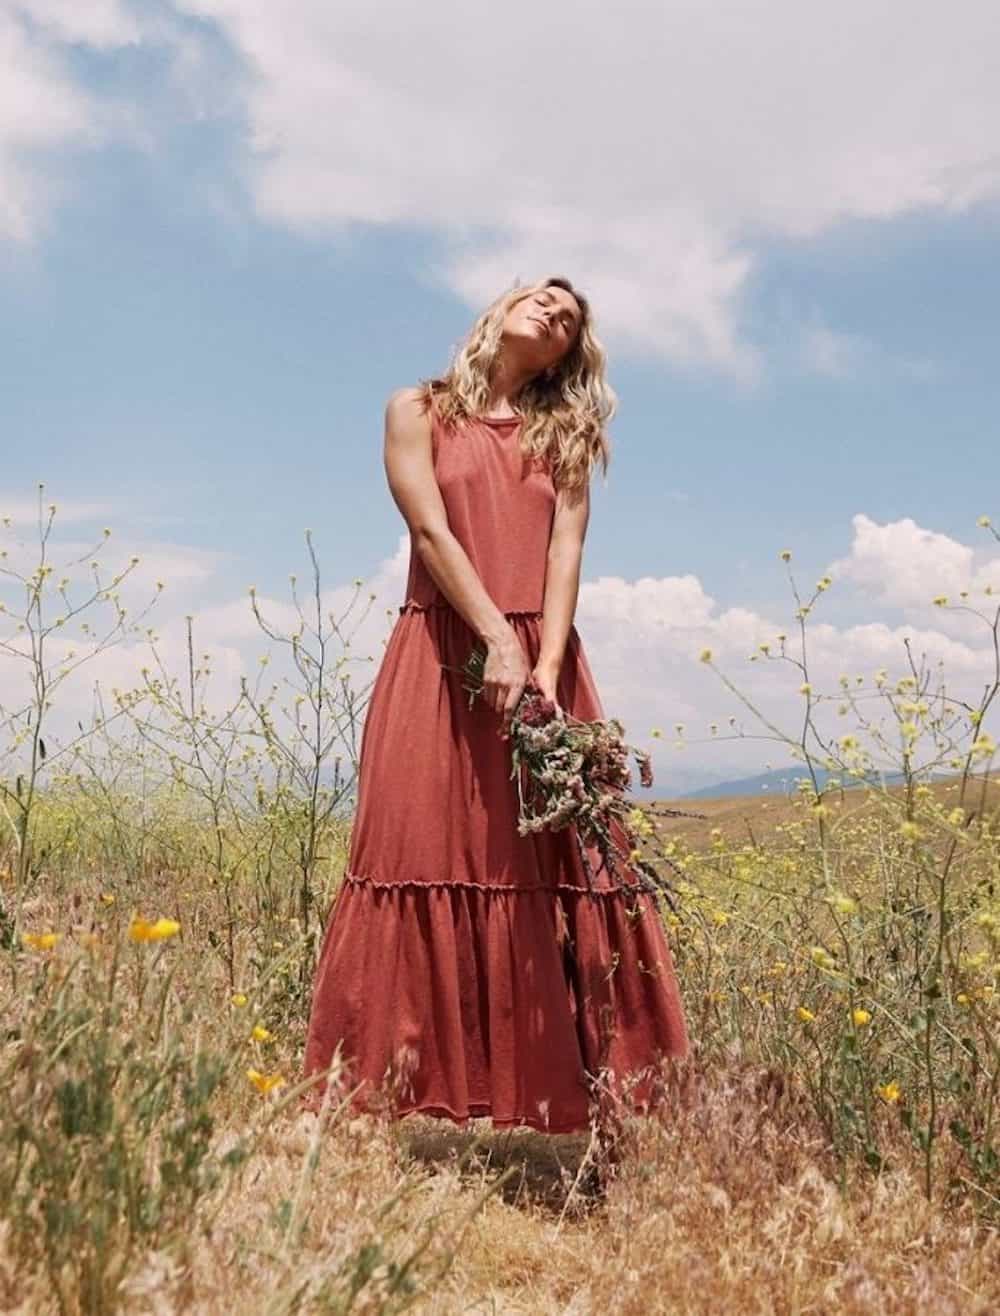 image of a woman standing in a field holding flowers wearing a pink maxi dress